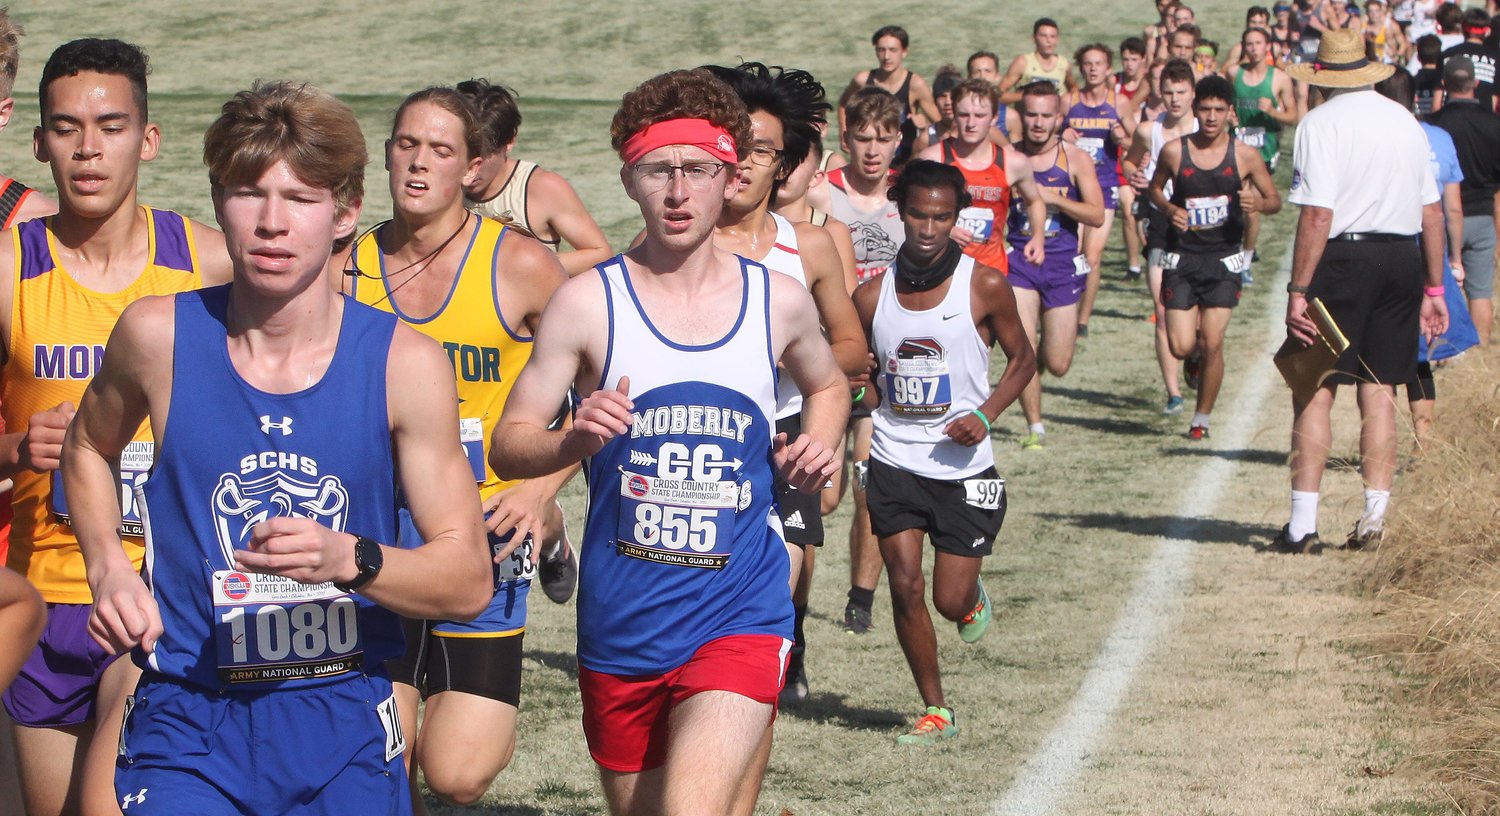 Moberly senior Nick Faiella qualified for the Class 4 boys state cross country championship run Friday and placed 95th with a time of 18:24.